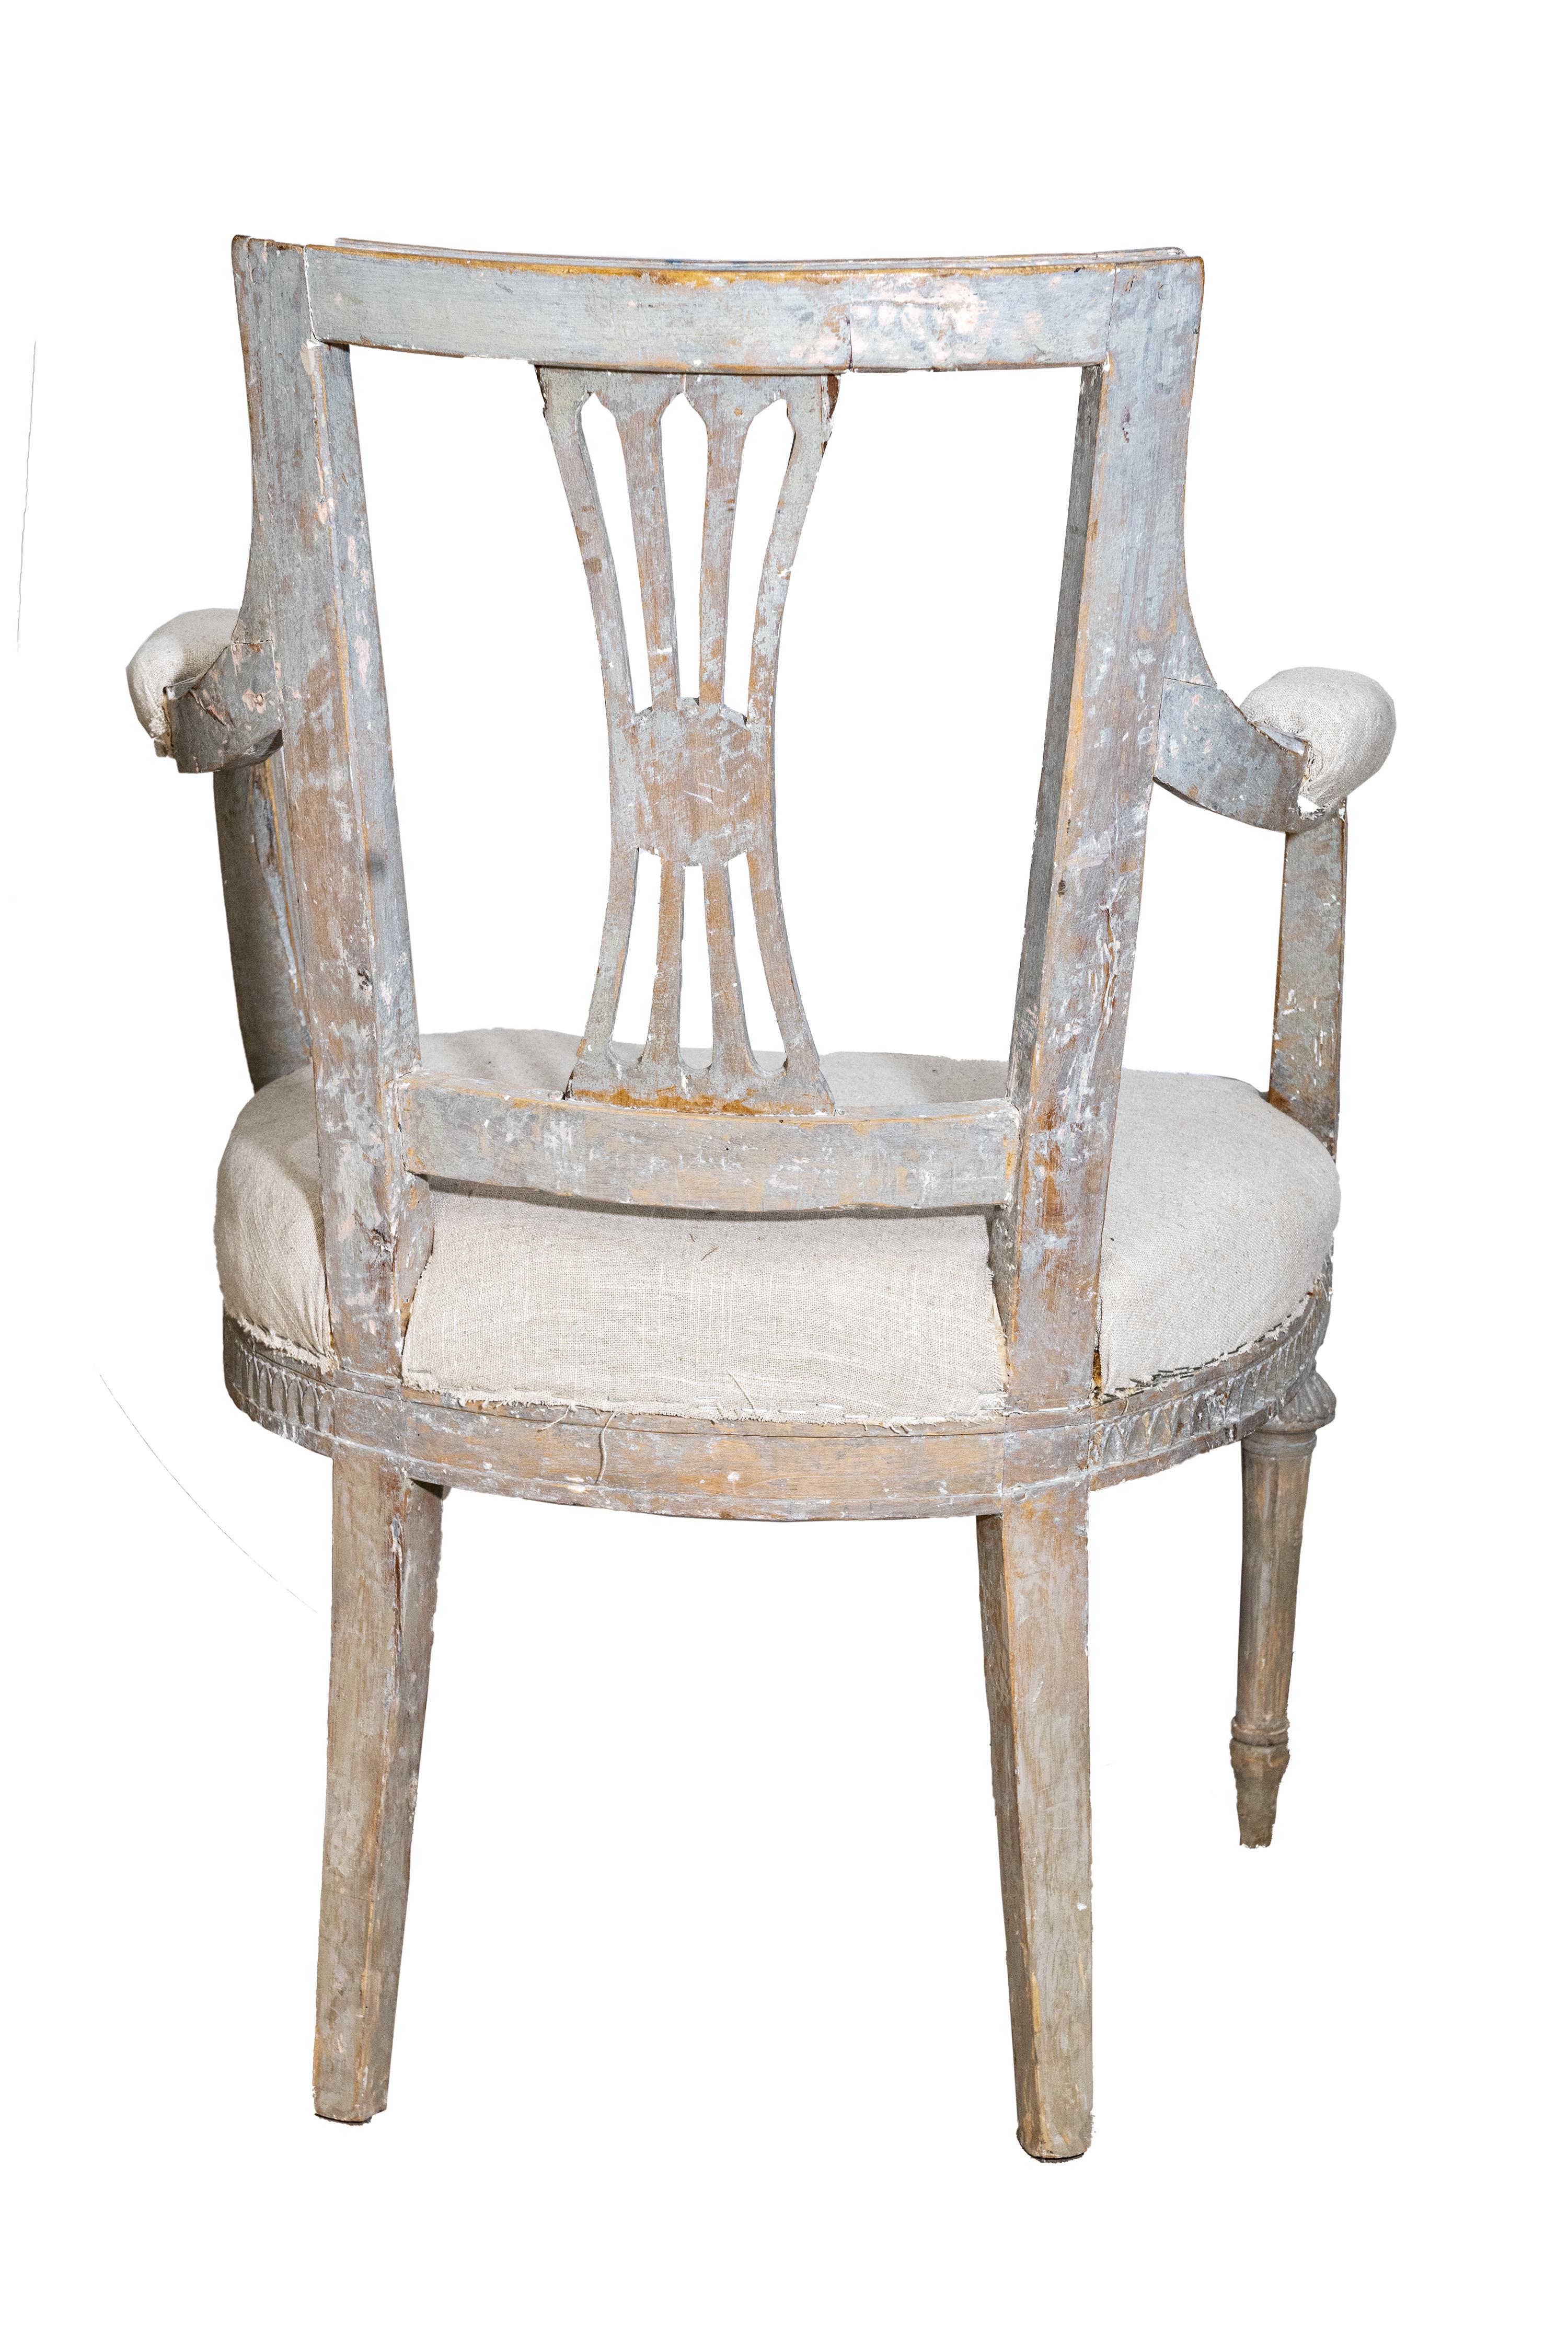 Matched Set of Six Painted Gustavian Dining Chairs, 2 Armchairs and 4 Chairs 11